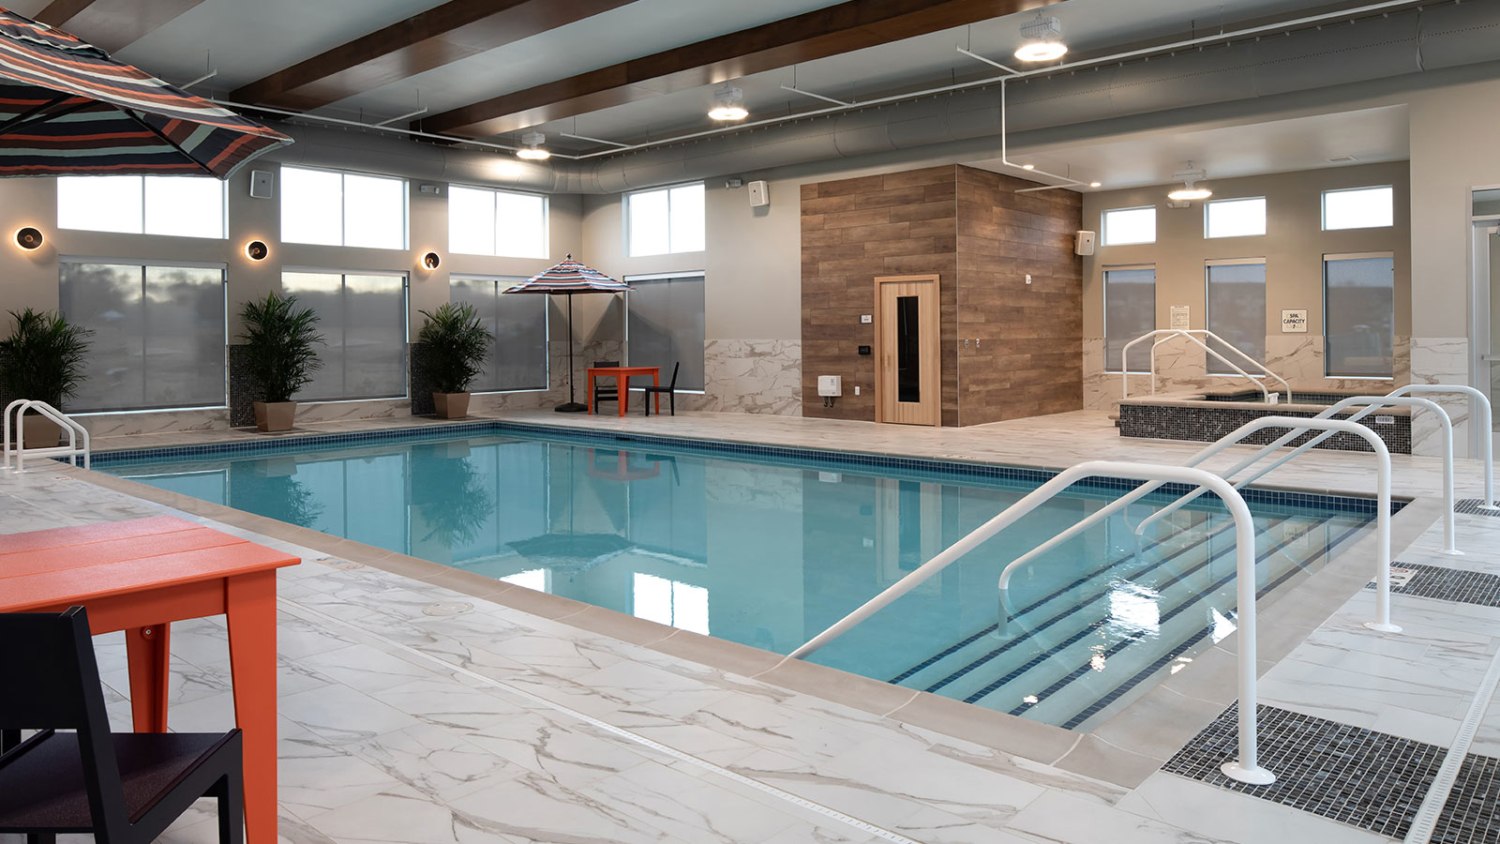 Indoor pool with seating areas, sauna and spa